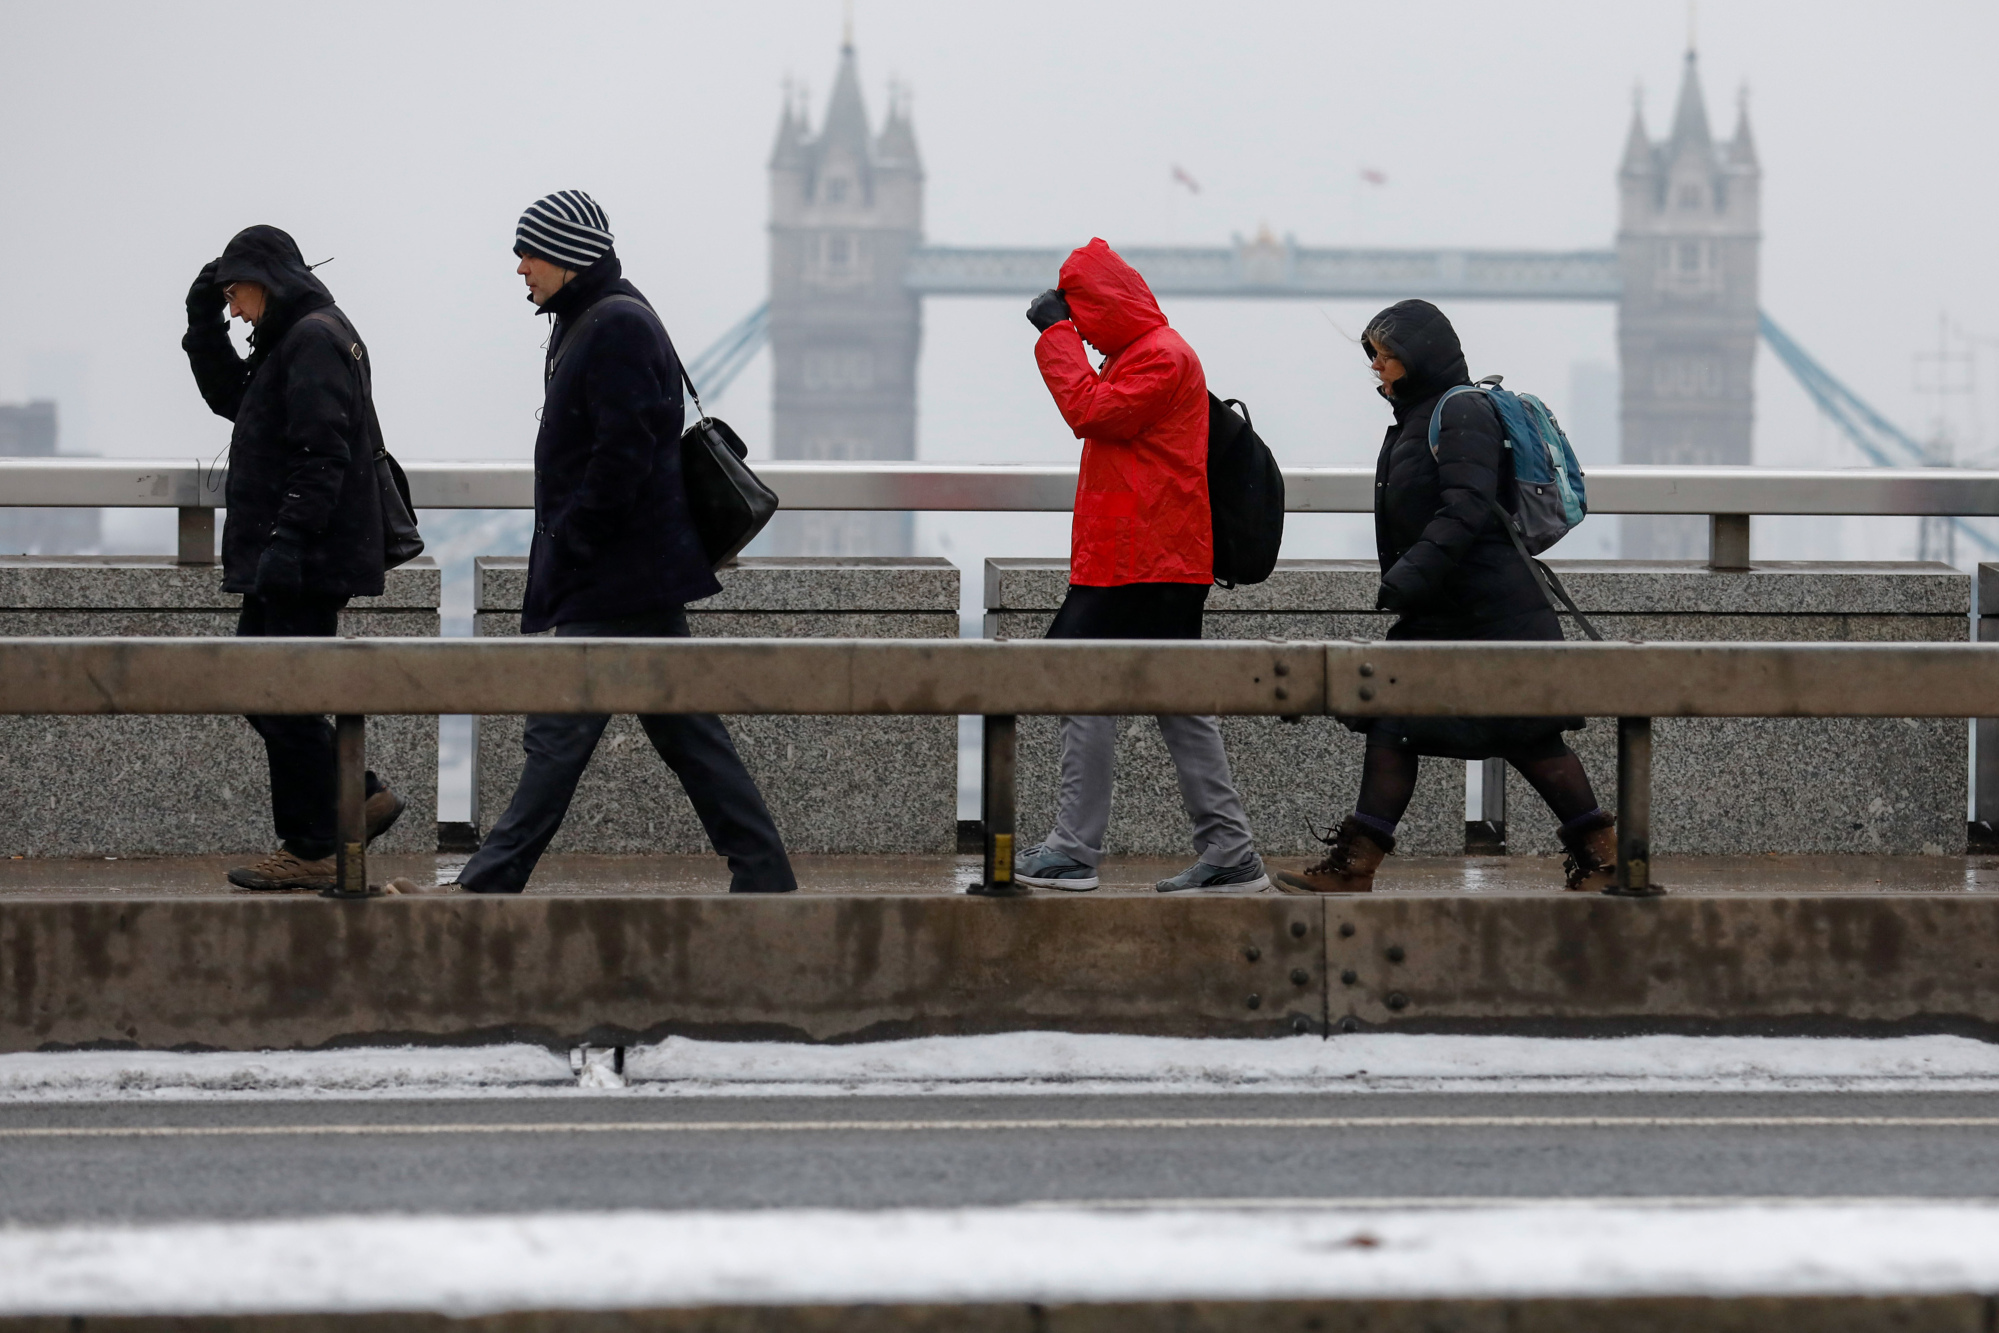 Commuters make their way across London Bridge in the snow in London, U.K., on Thursday, March 1, 2018.  Photographer: Luke MacGregor/Bloomberg